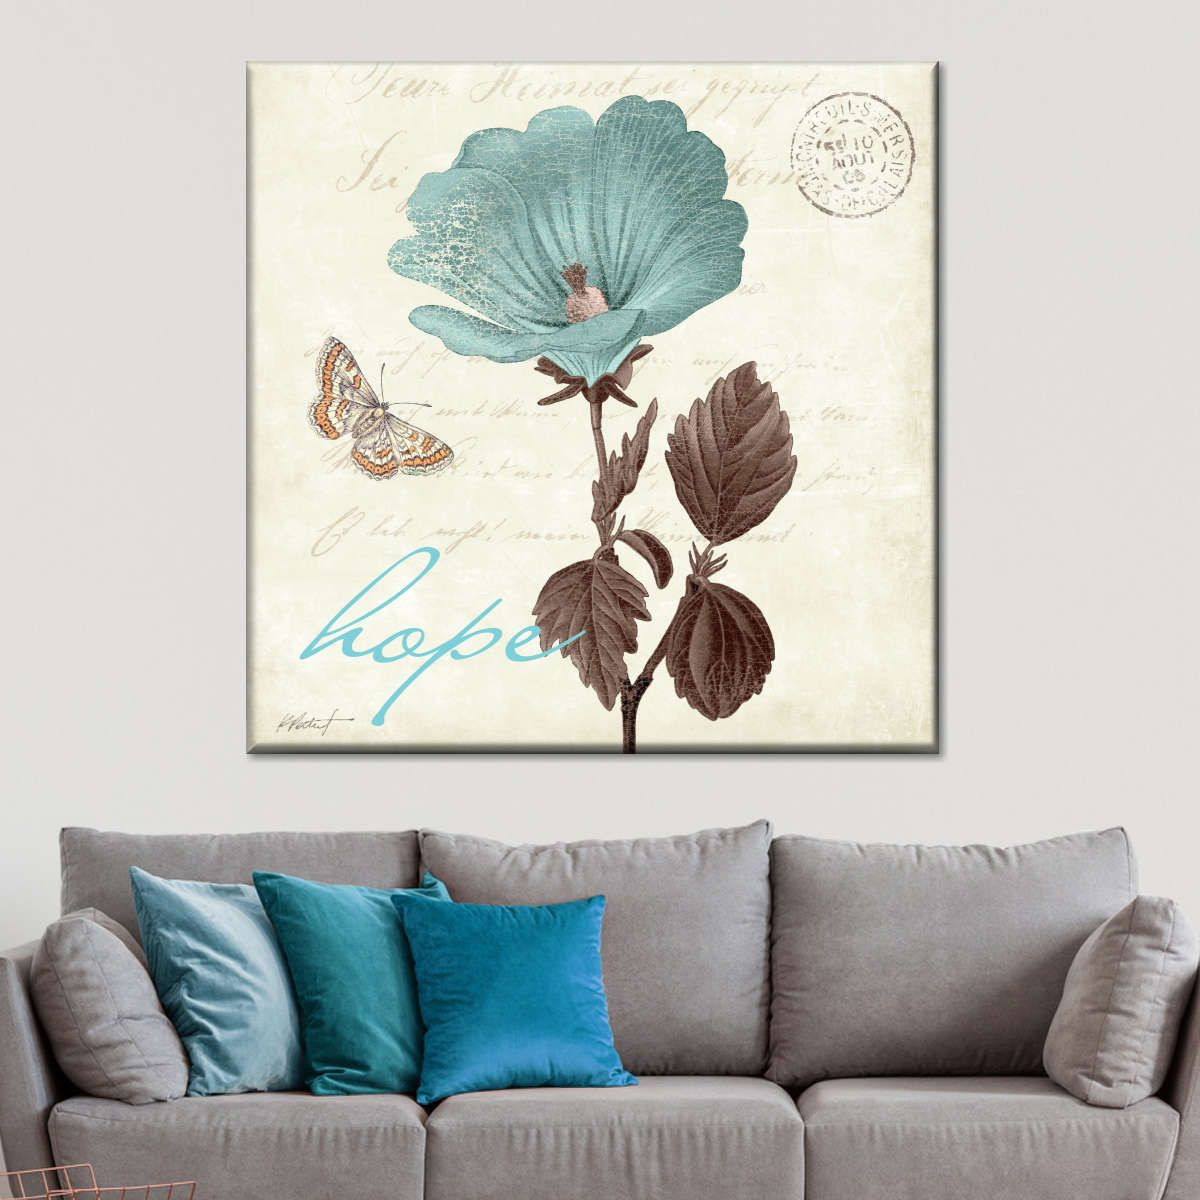 Touch of Blue 3 Hope Canvas Wall Art Decor